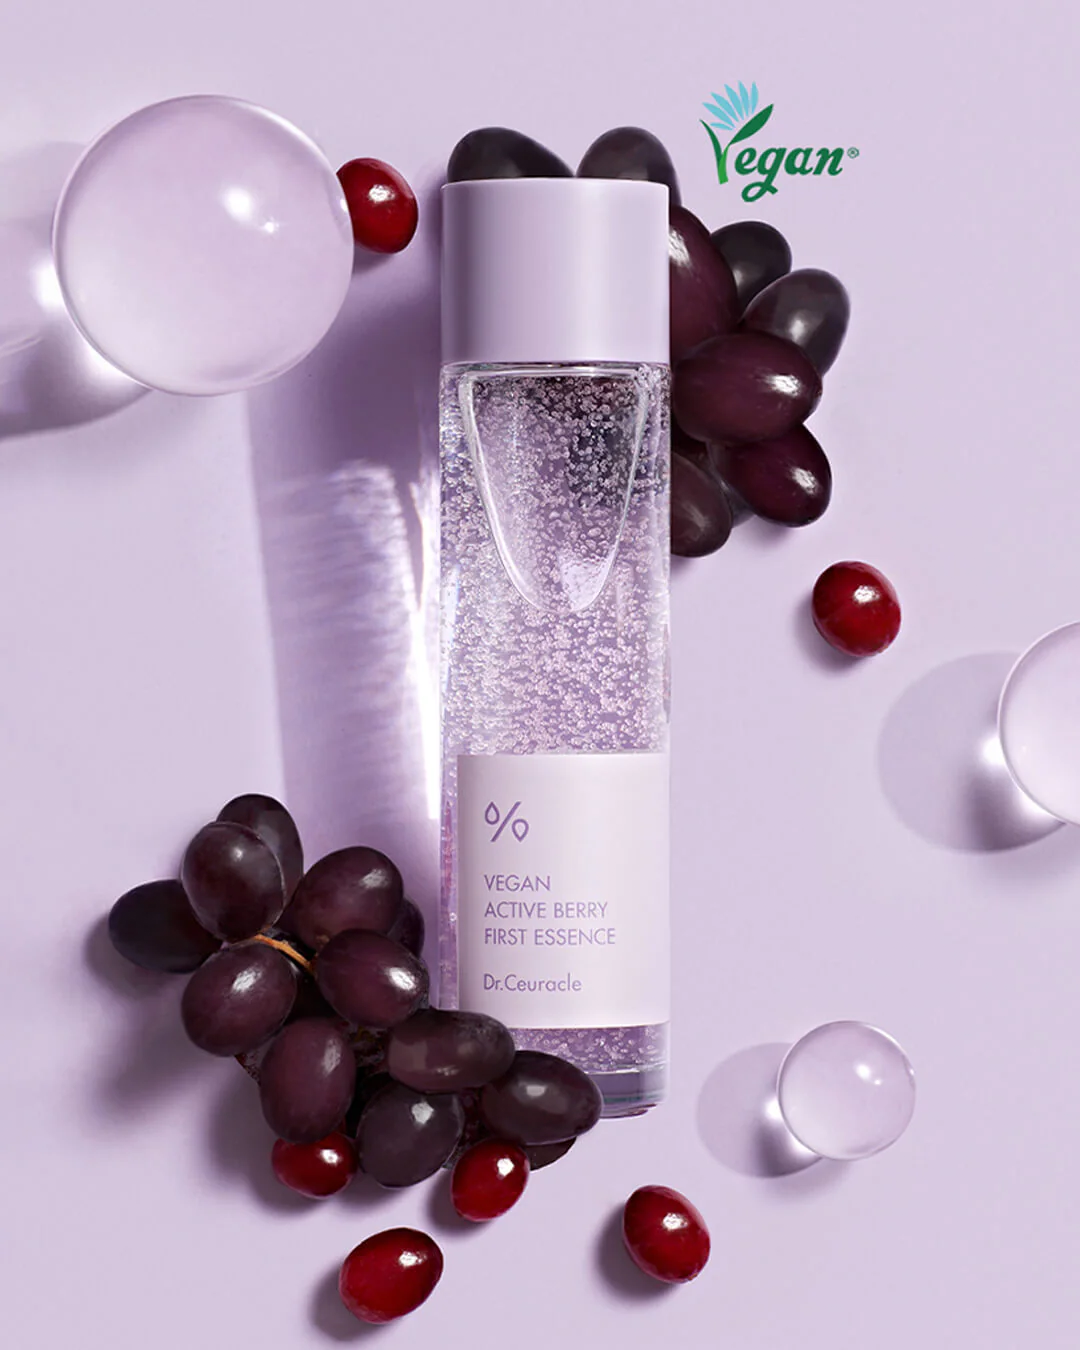 [Dr. Ceuracle] Vegan Active Berry First Essence